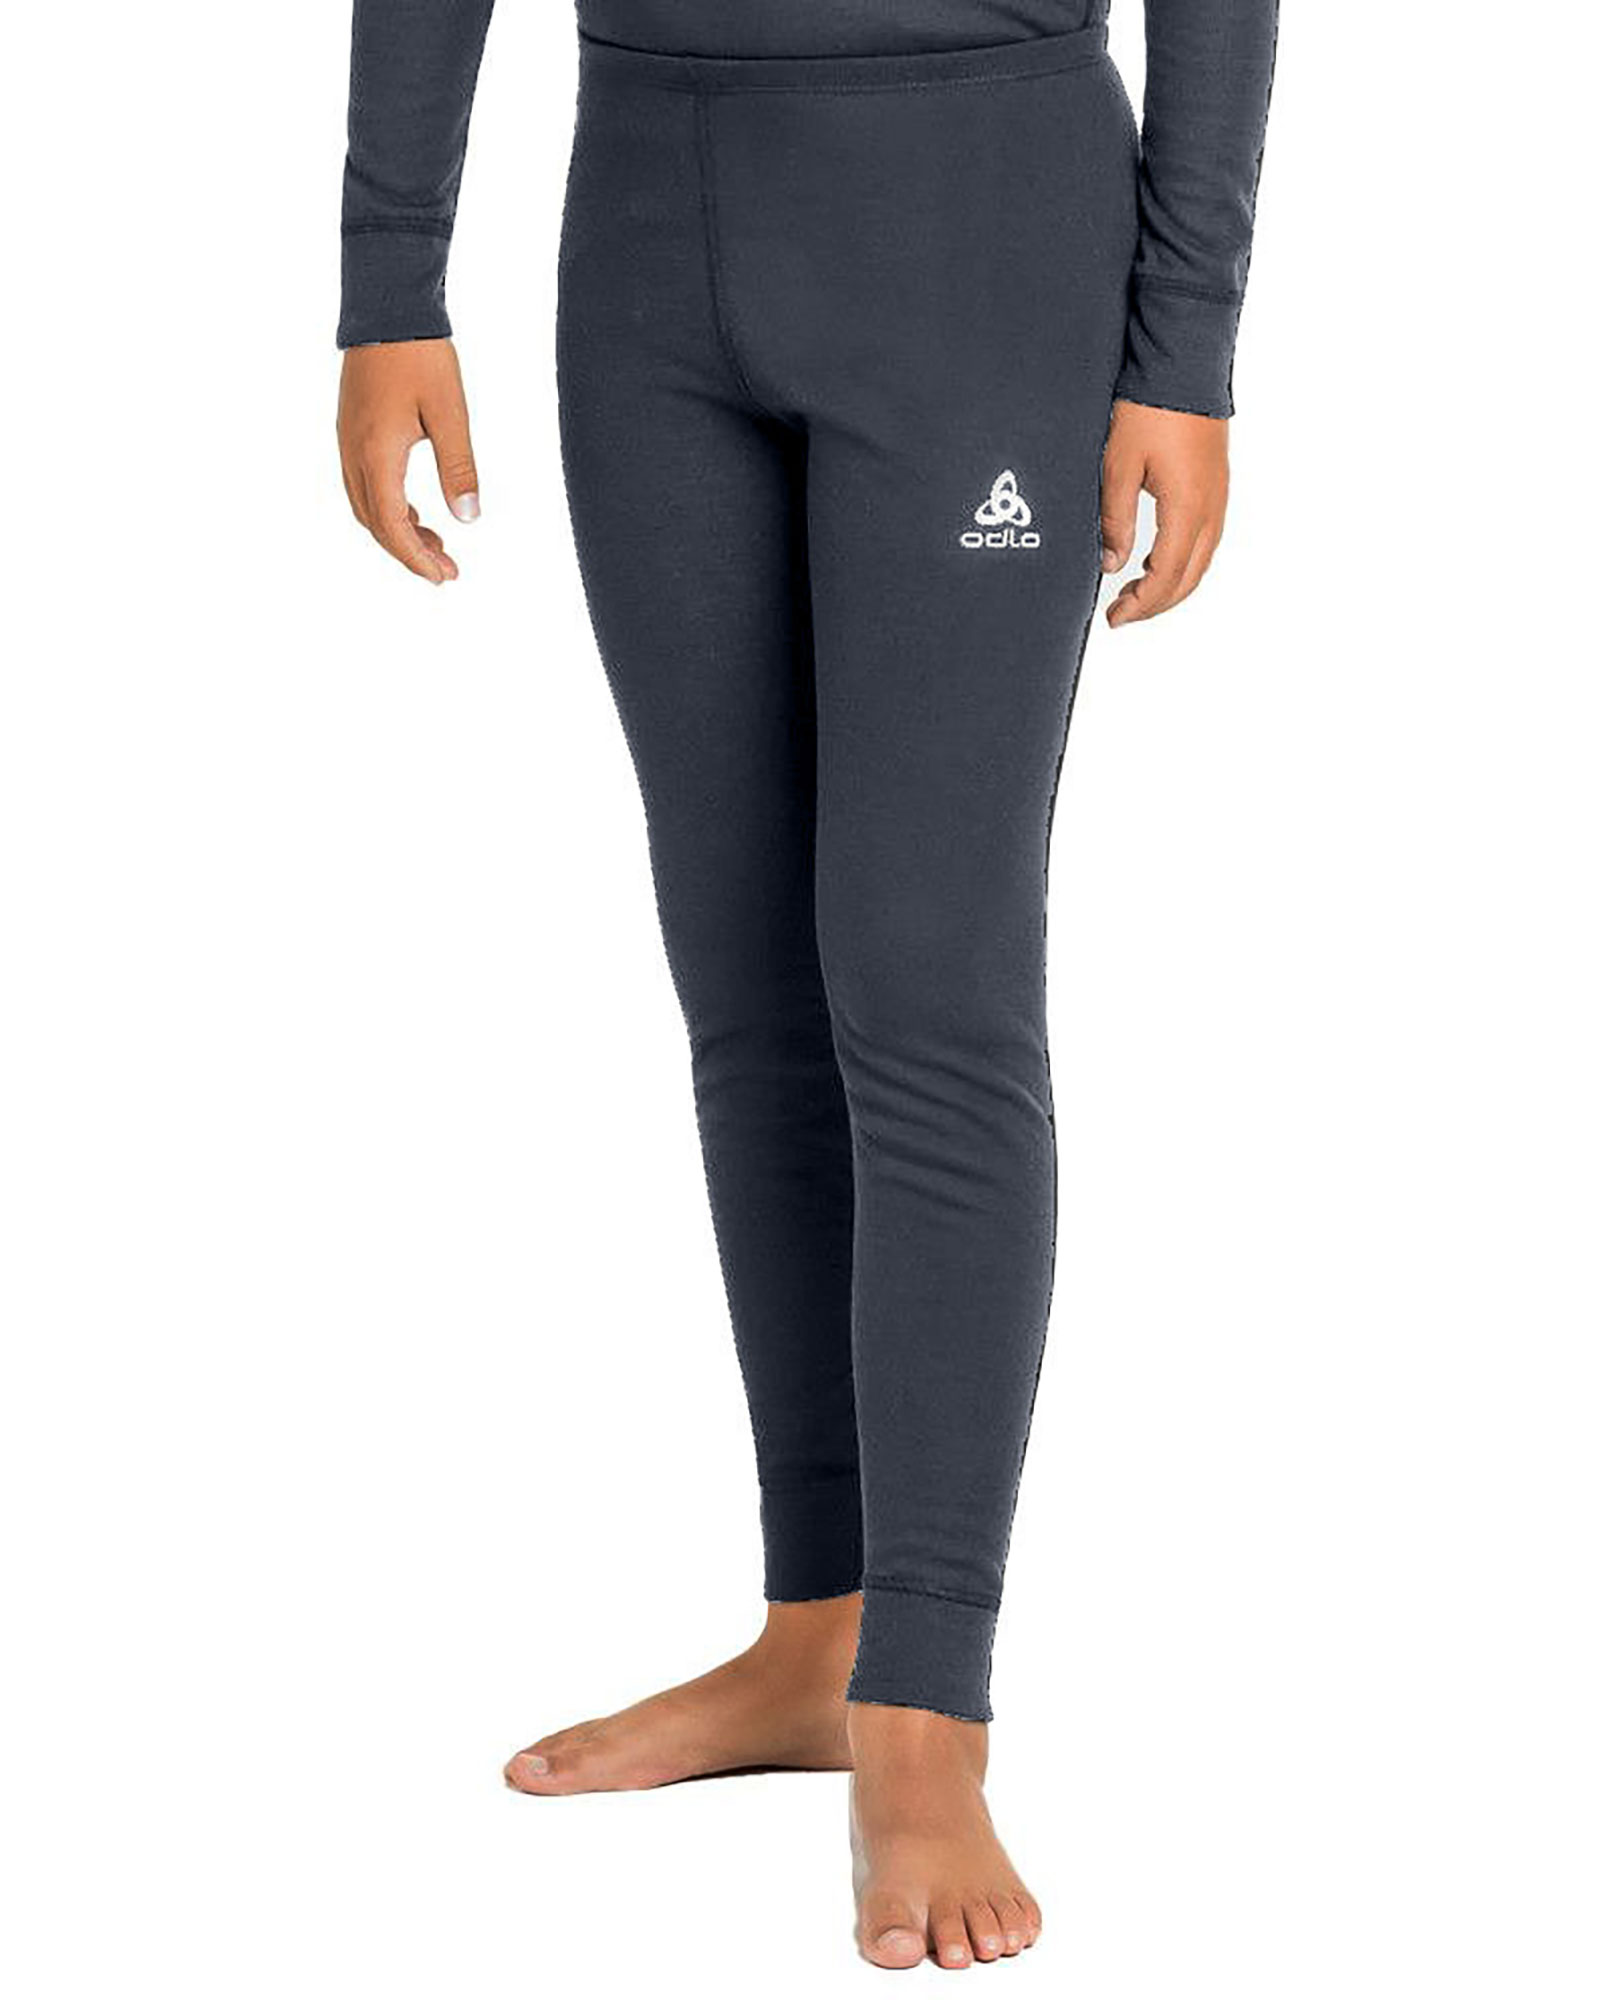 Odlo Active Warm Eco BL Kids’ Bottoms Long - India Ink 12 Years